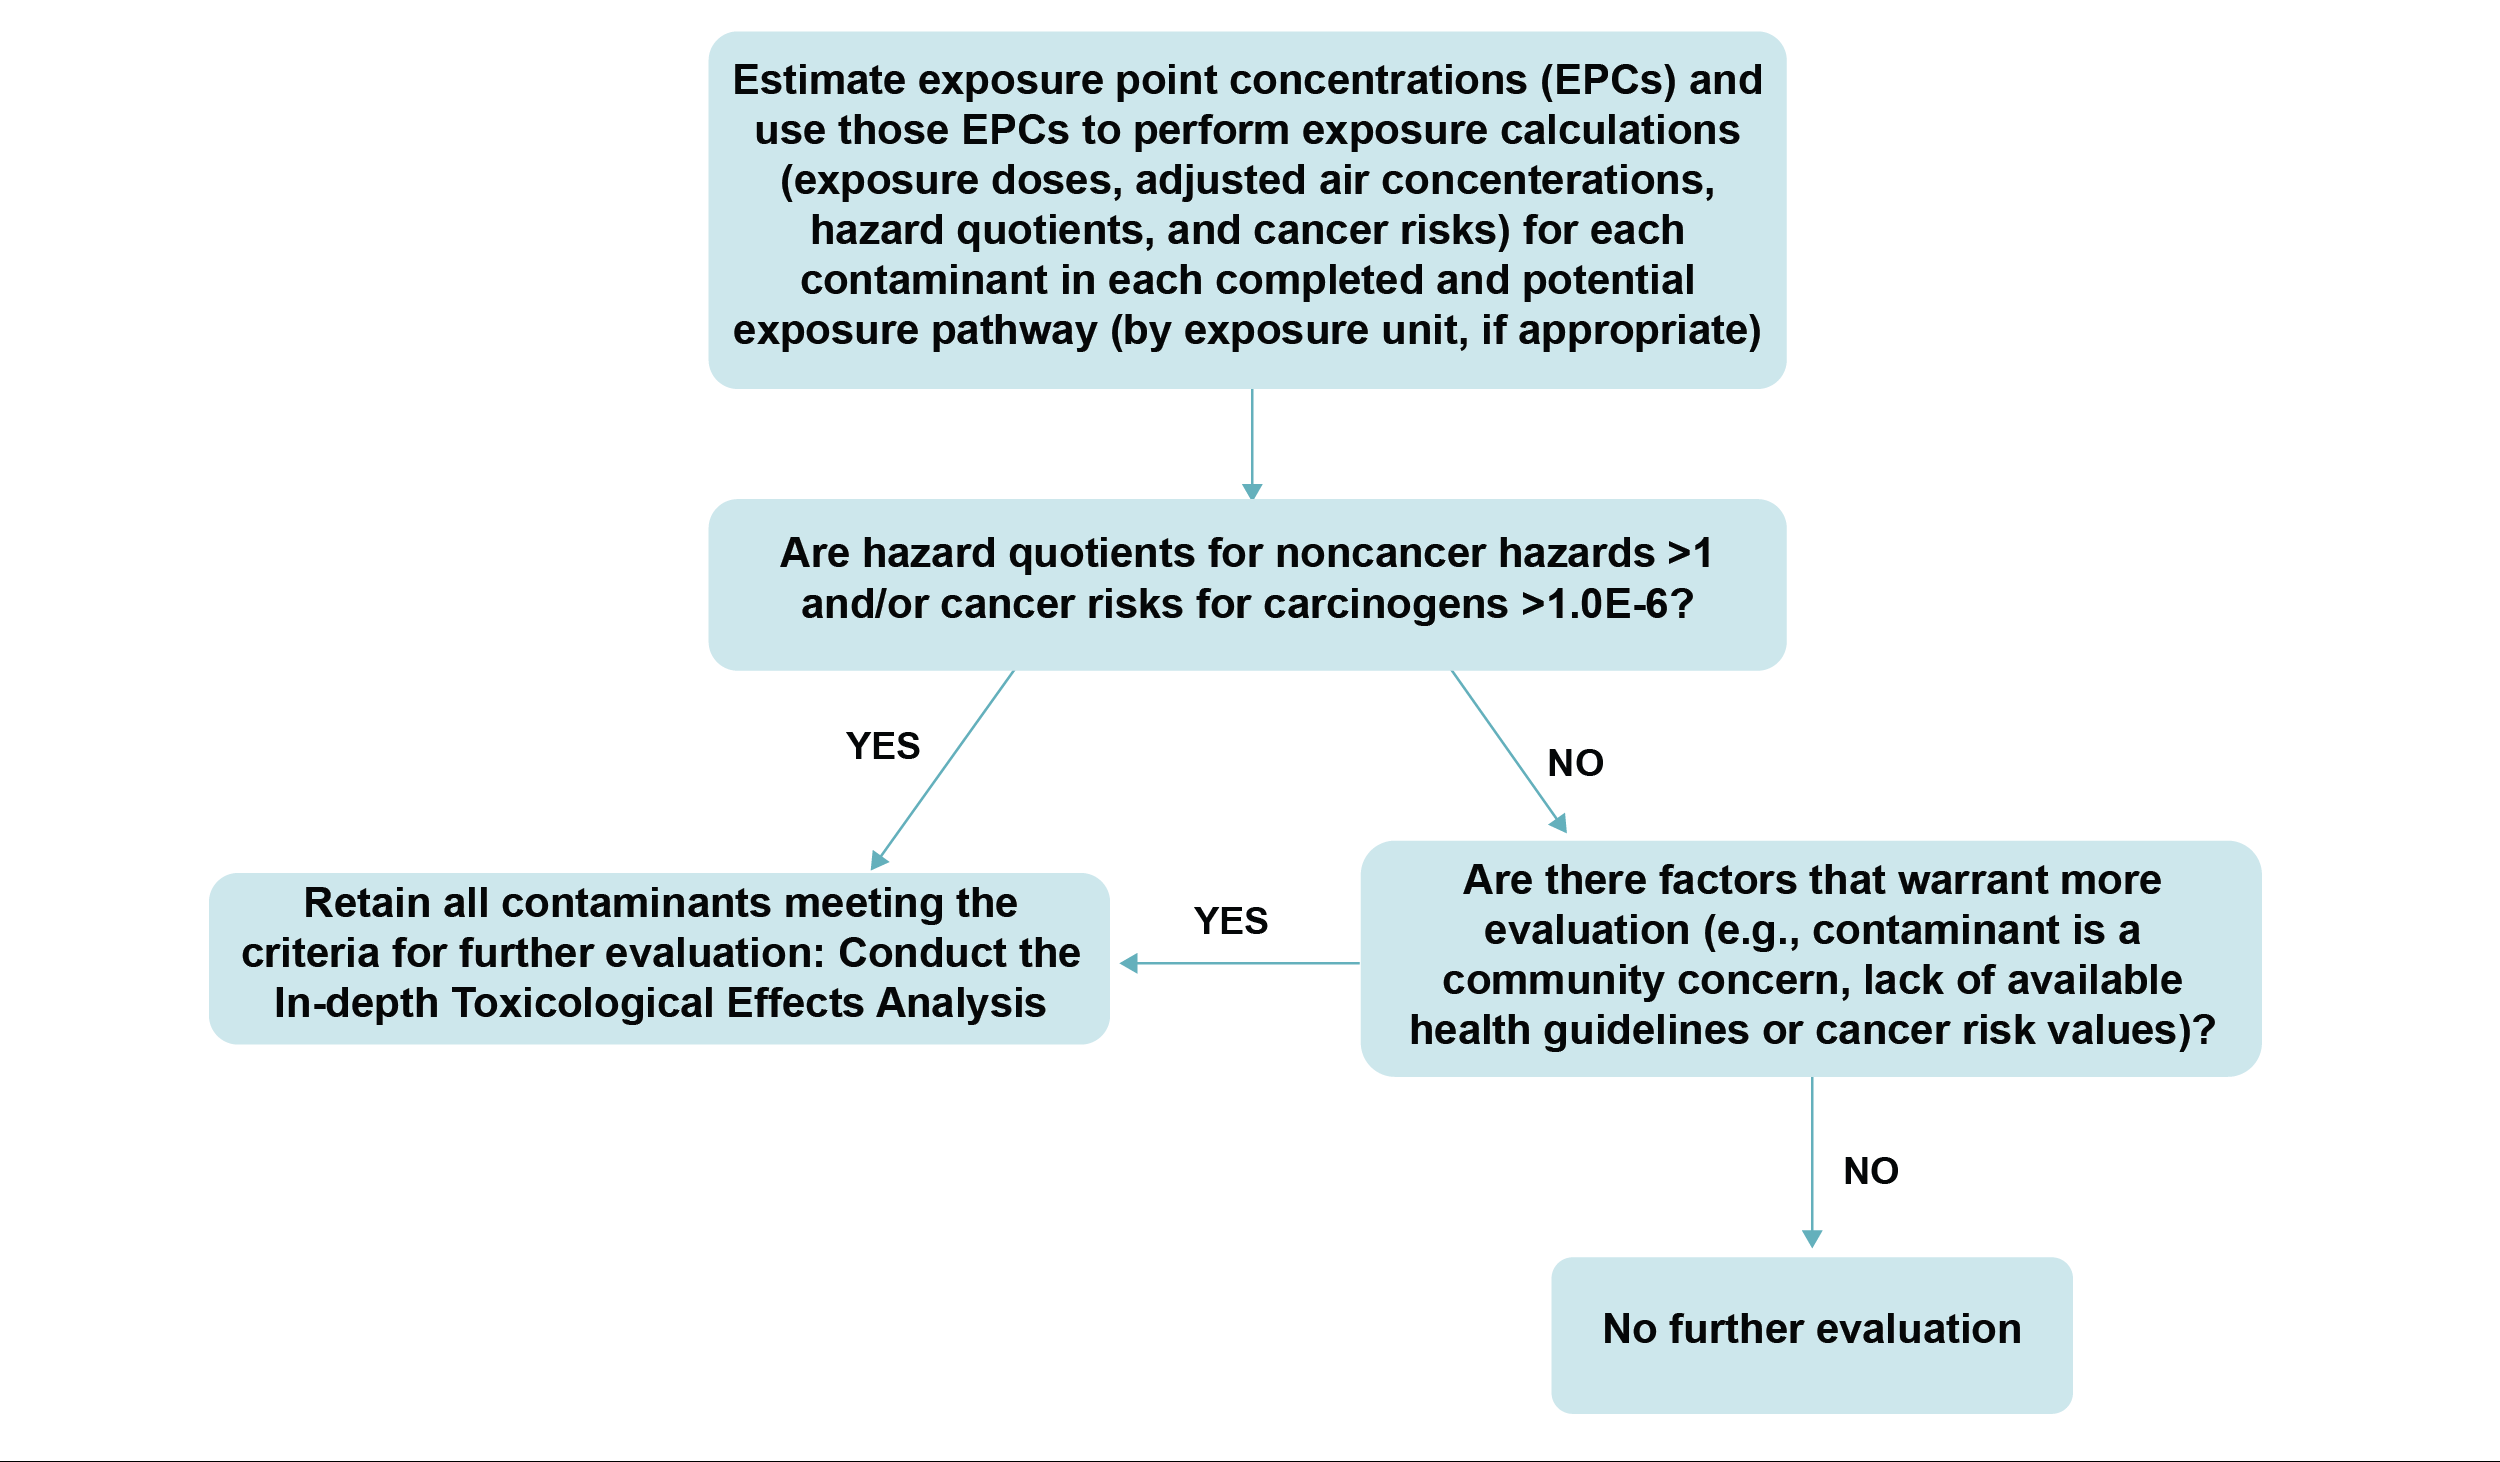 This diagram shows the process and decision logic for ATSDR’s scientific evaluation of EPCs and exposure calculations.